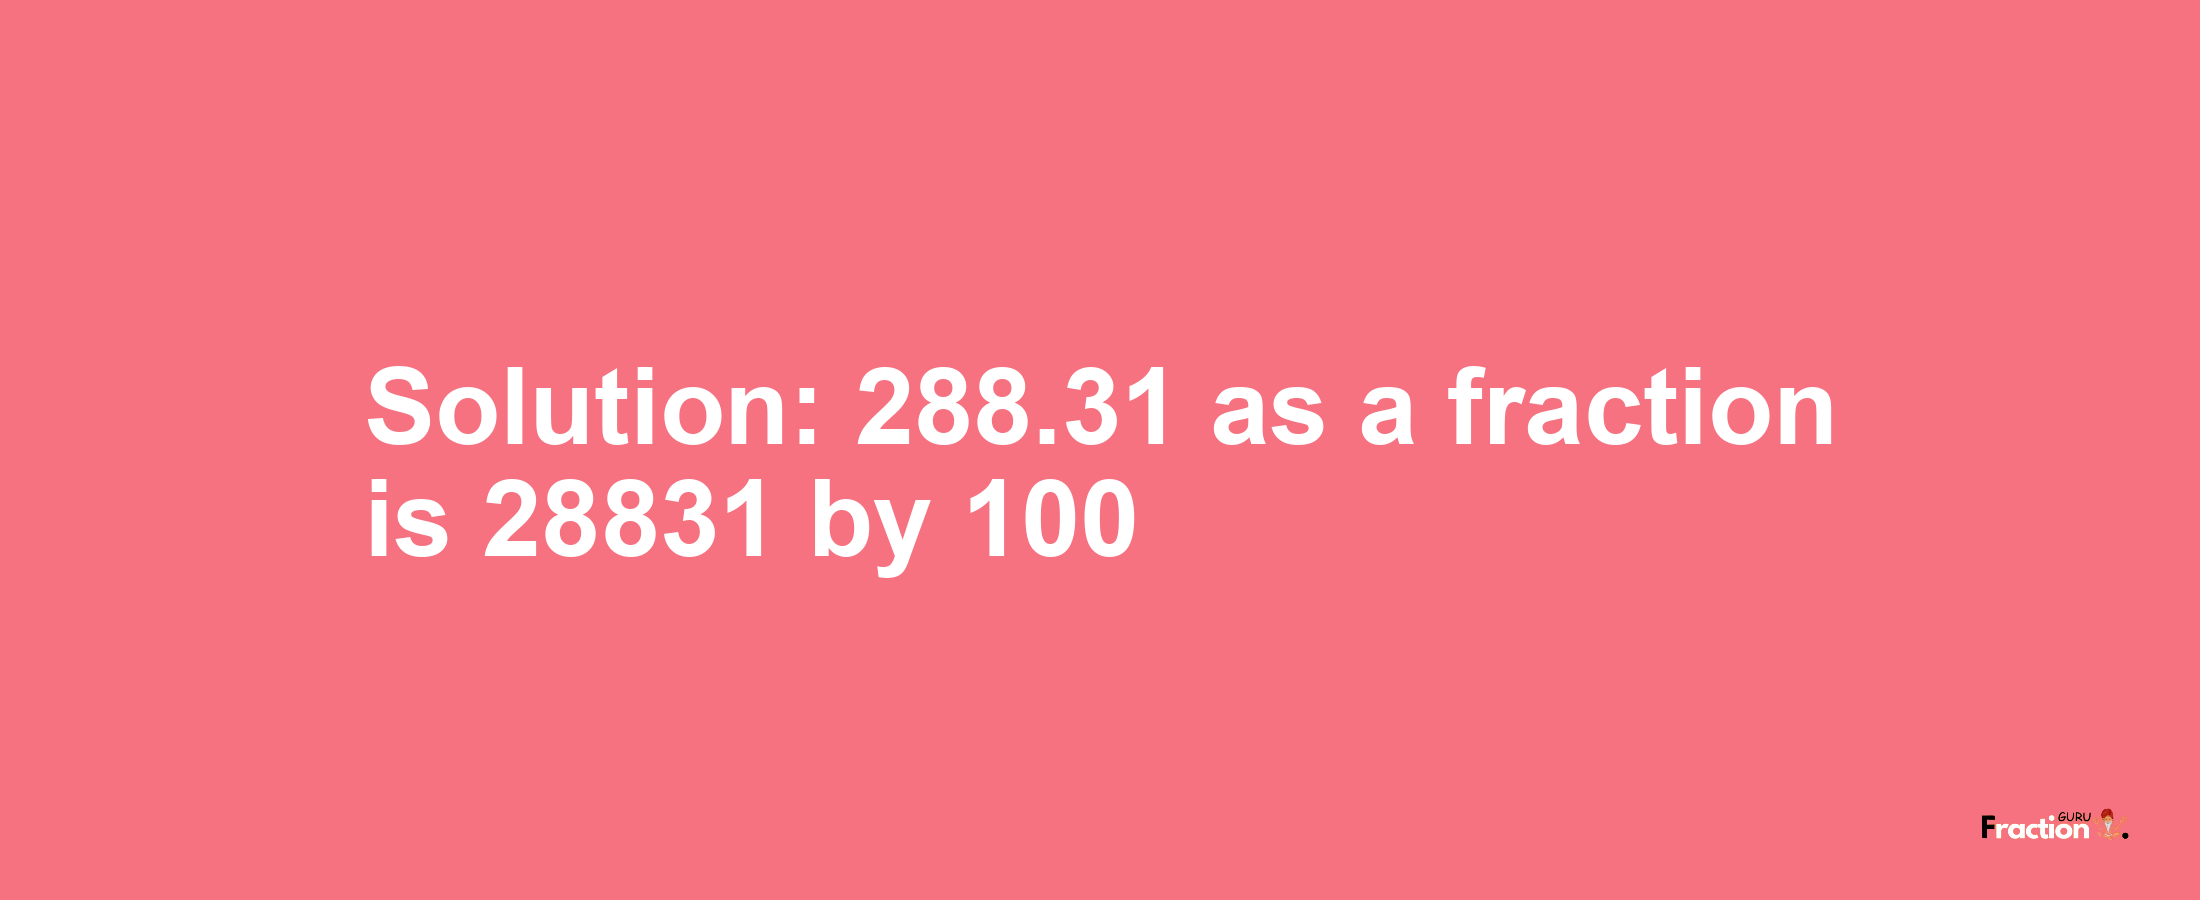 Solution:288.31 as a fraction is 28831/100